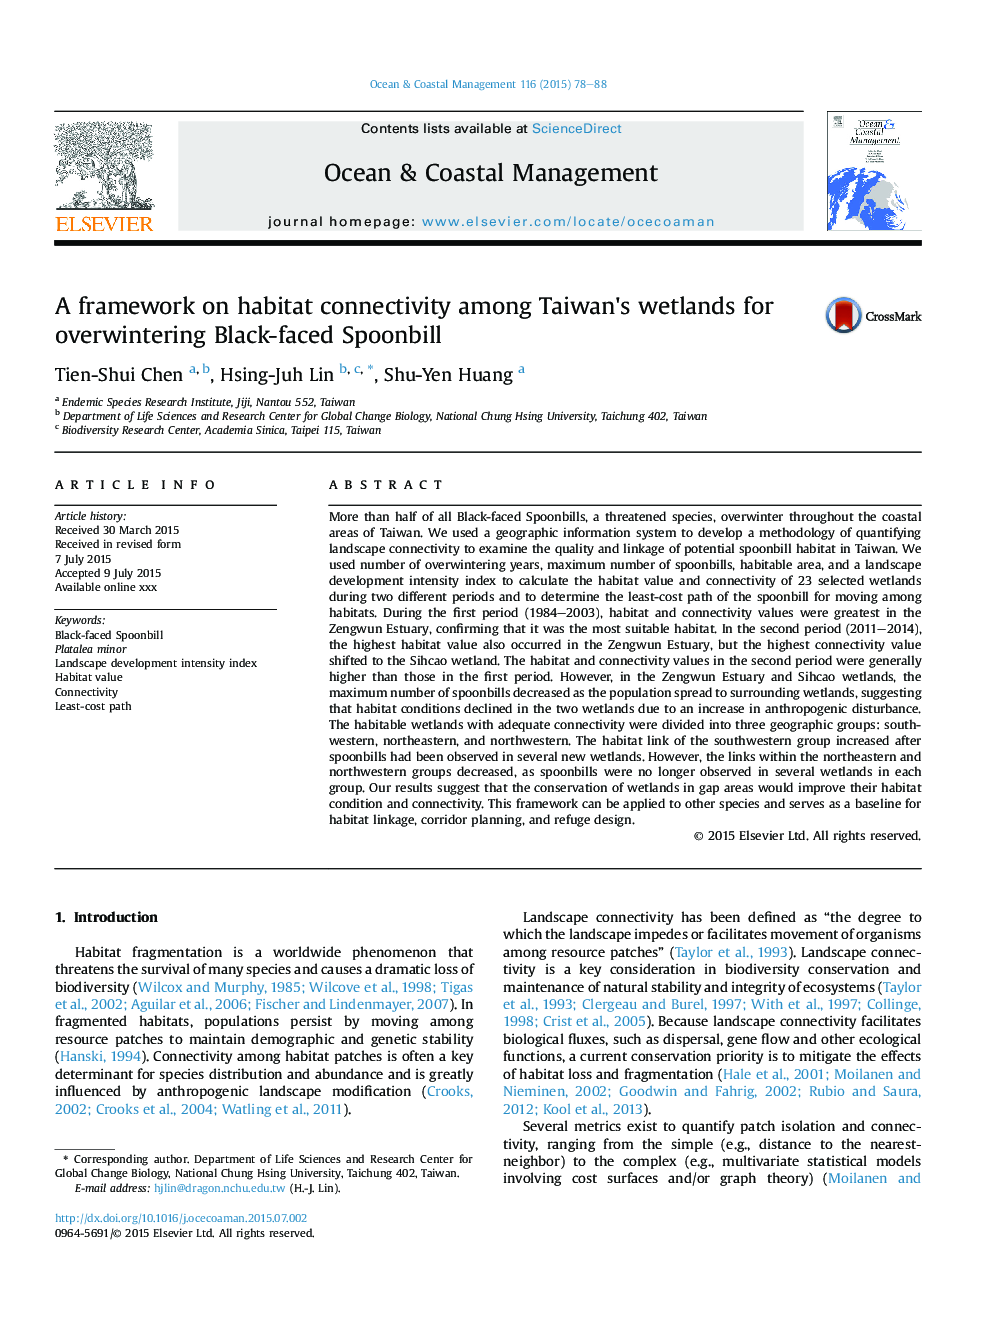 A framework on habitat connectivity among Taiwan's wetlands for overwintering Black-faced Spoonbill